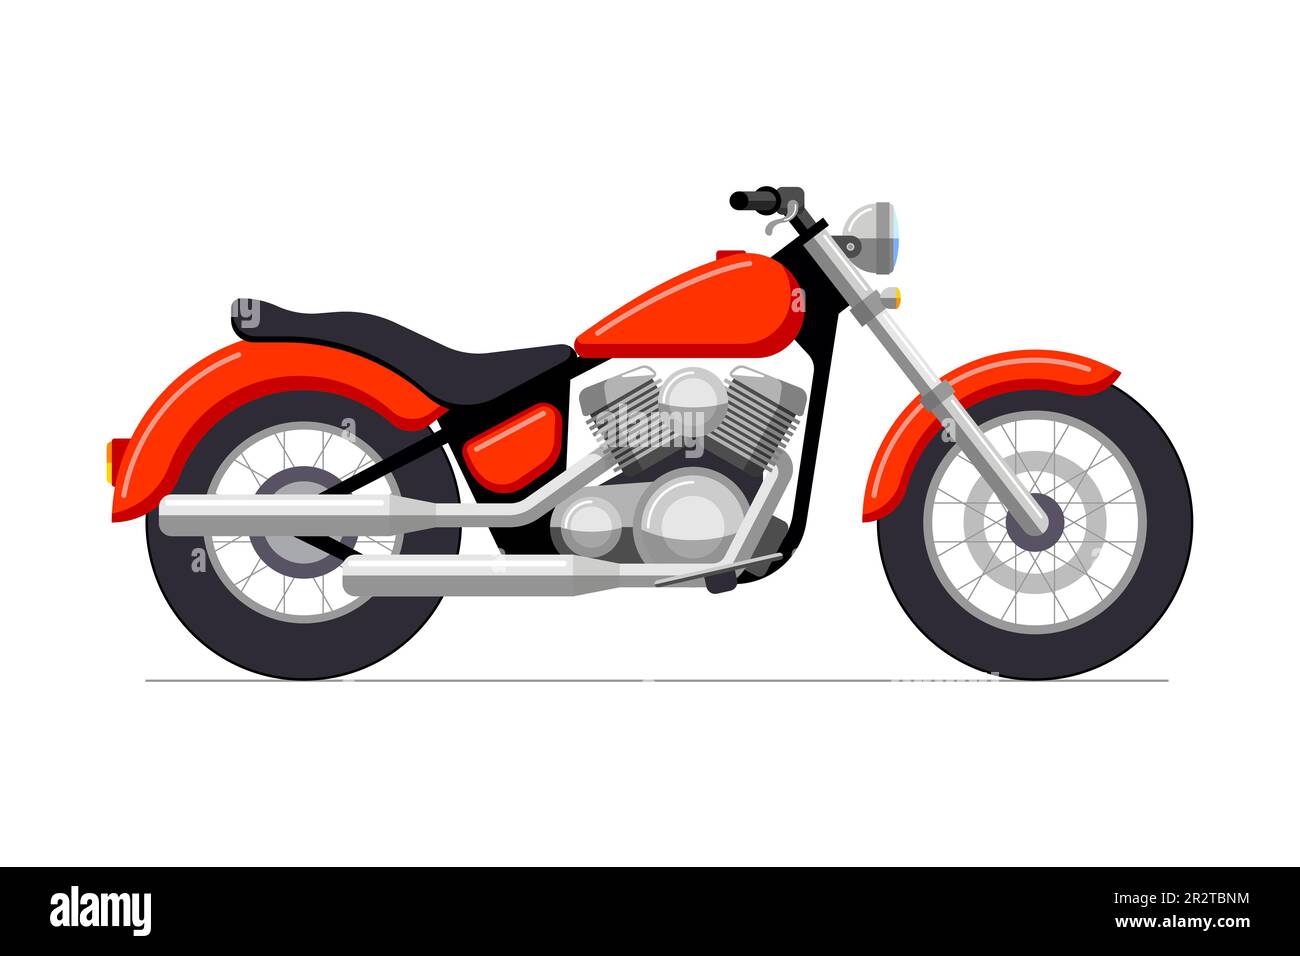 Retro classic motorbike. Vintage motorcycle side view. Detailed red motor bicycle chopper vector eps illustration. Traditional road transport isolated on white background Stock Vector